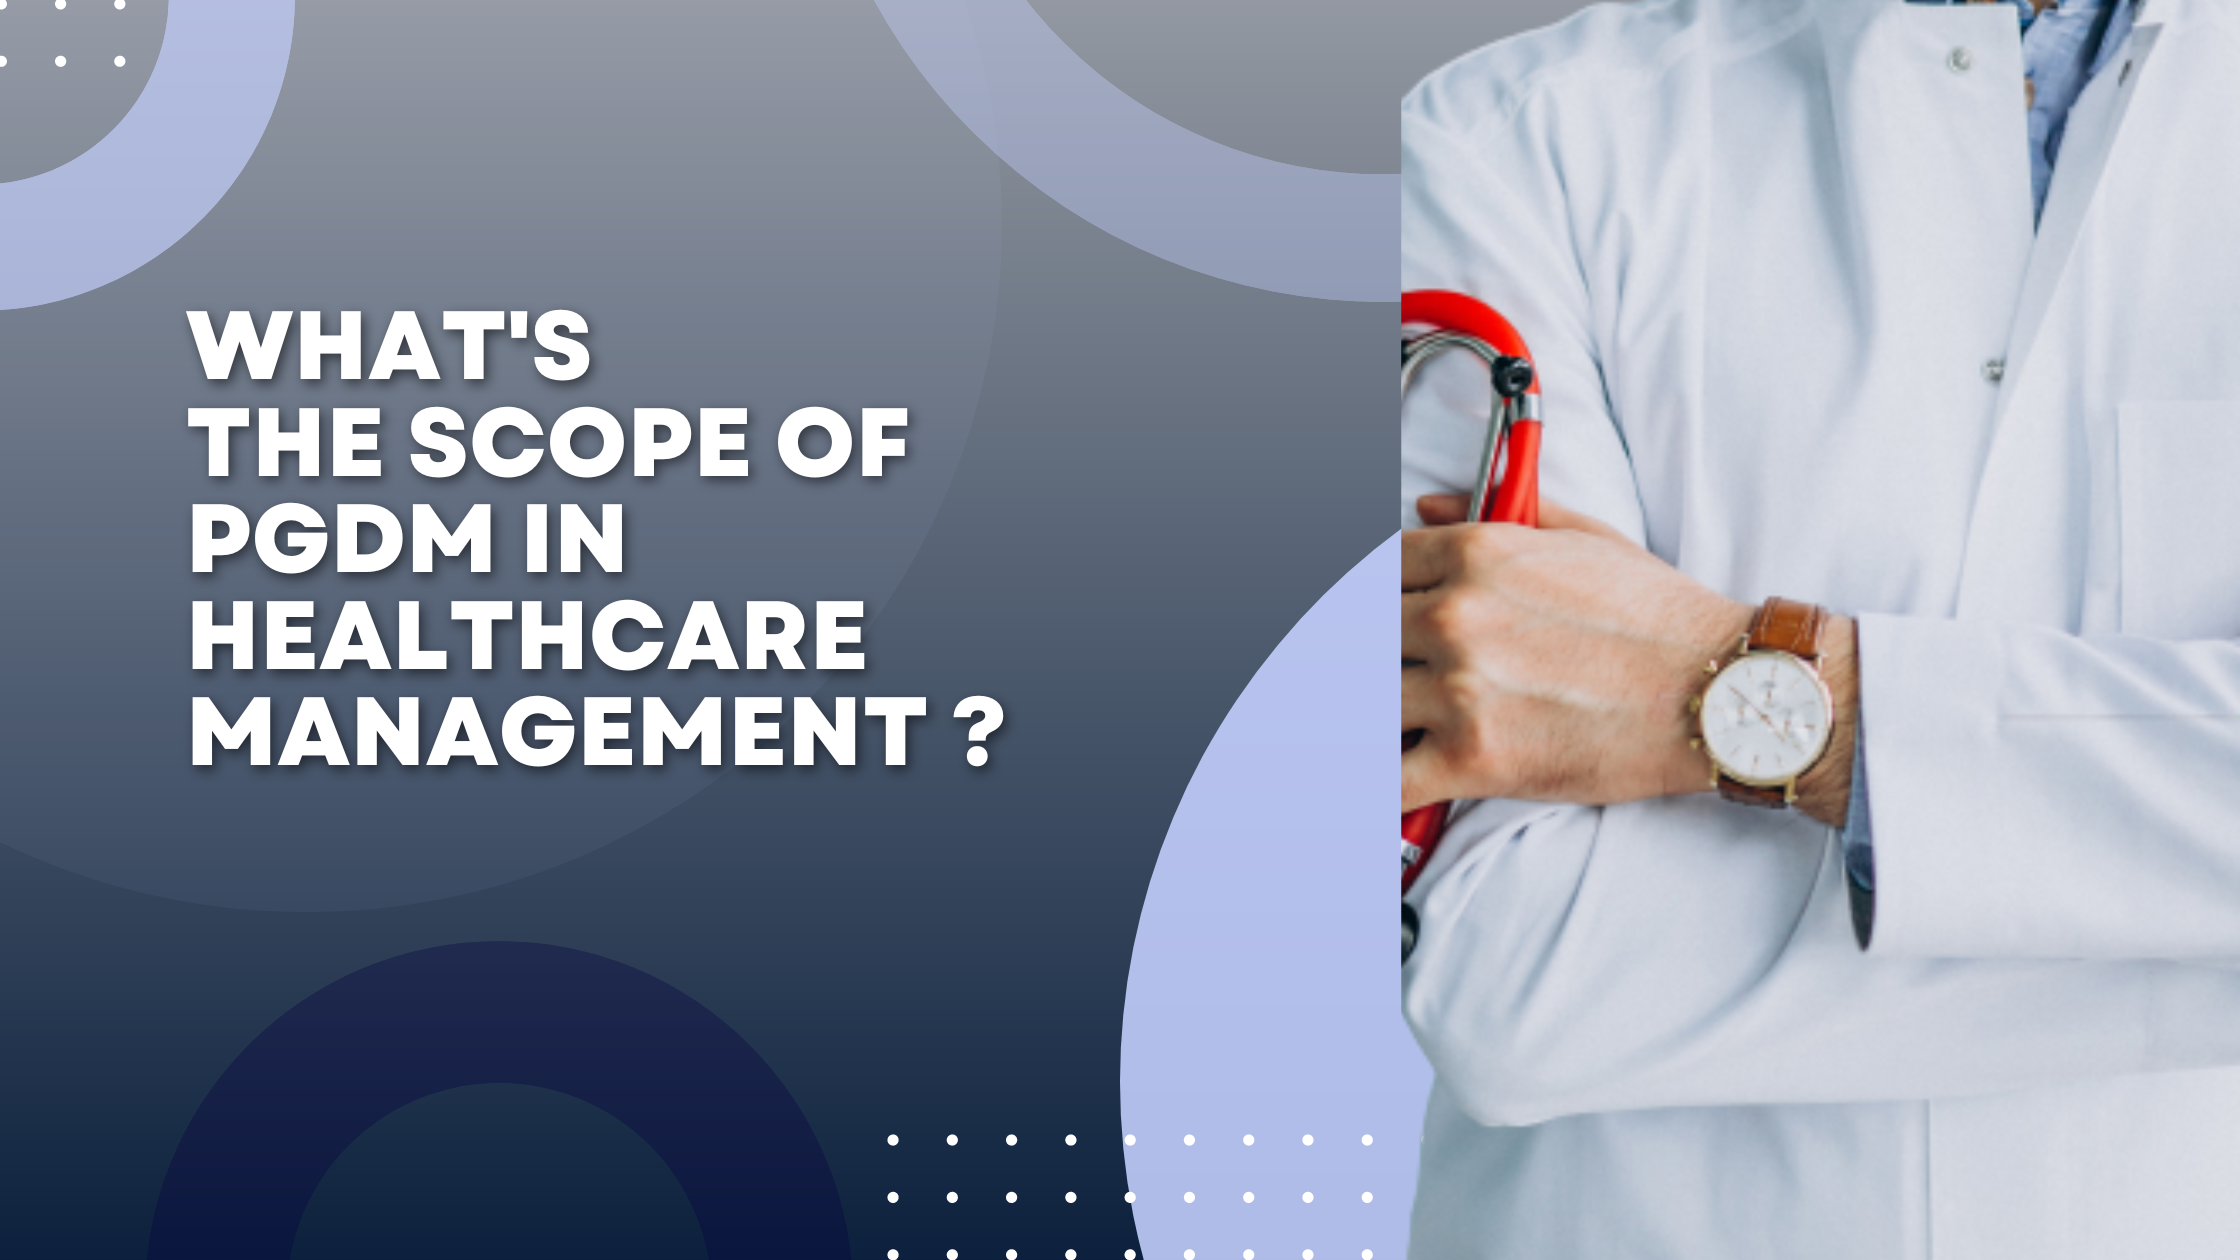 Whats the scope of PGDM in Healthcare Management